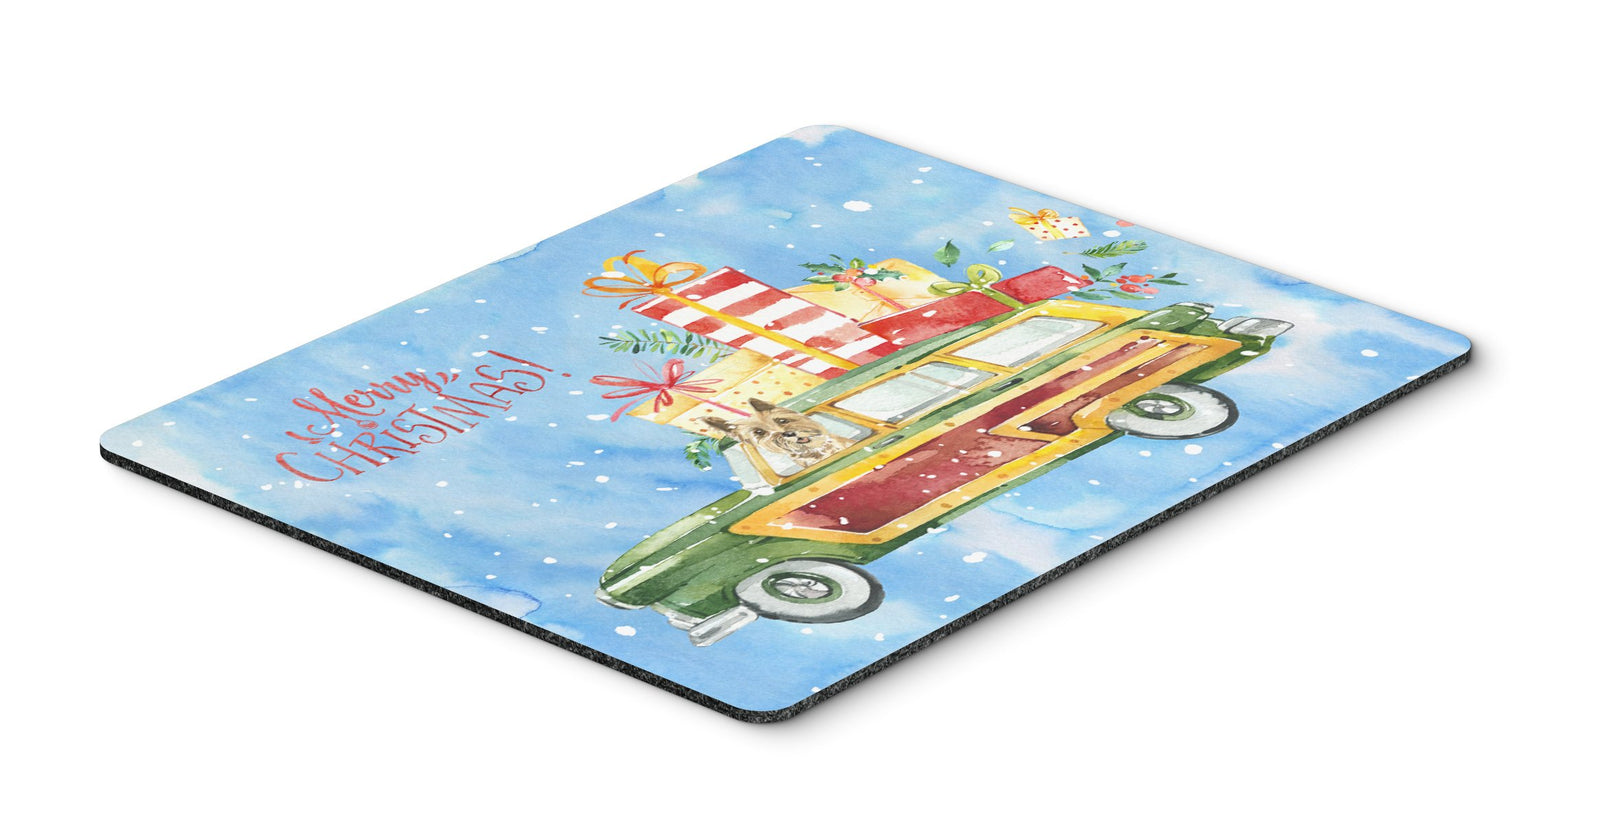 Merry Christmas Cairn Terrier Mouse Pad, Hot Pad or Trivet CK2400MP by Caroline's Treasures